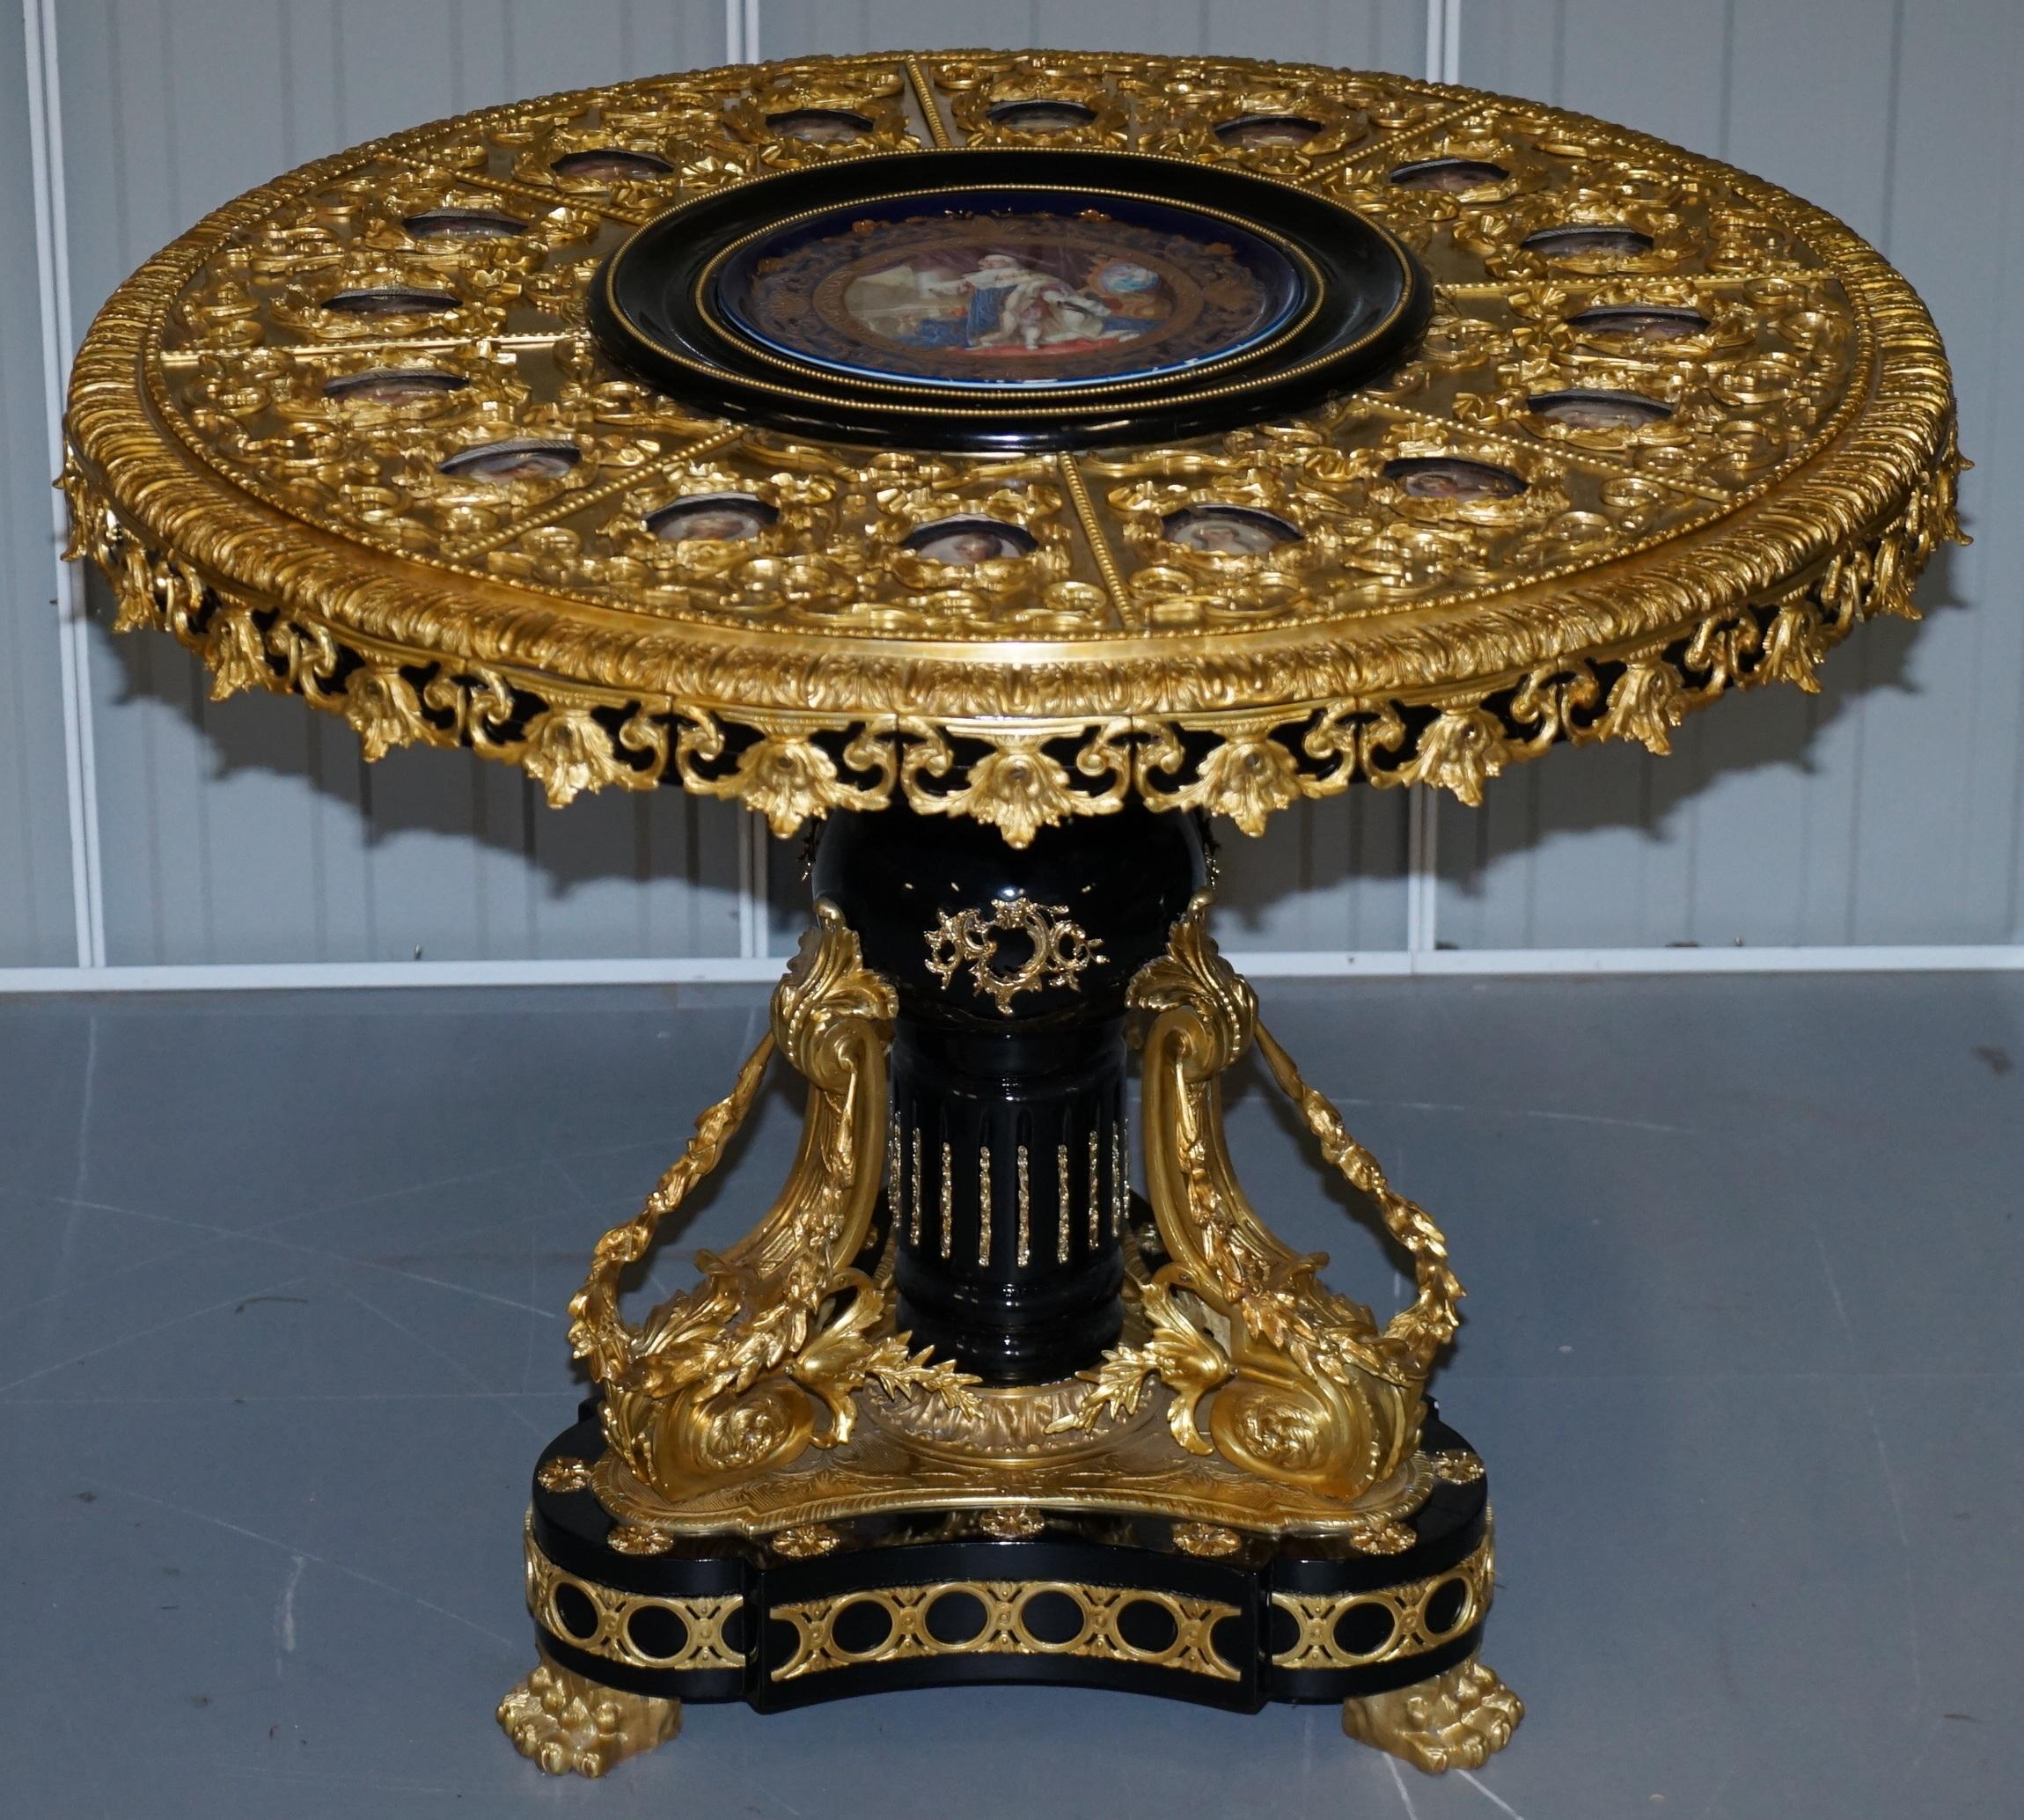 Wimbledon-Furniture

Wimbledon-Furniture is delighted to offer for sale this very rare Napoleon III – Louis XVI style gilt bronzed, ebonised and porcelain plaque mounted cobalt blue ground serves centre occasional table with central plate